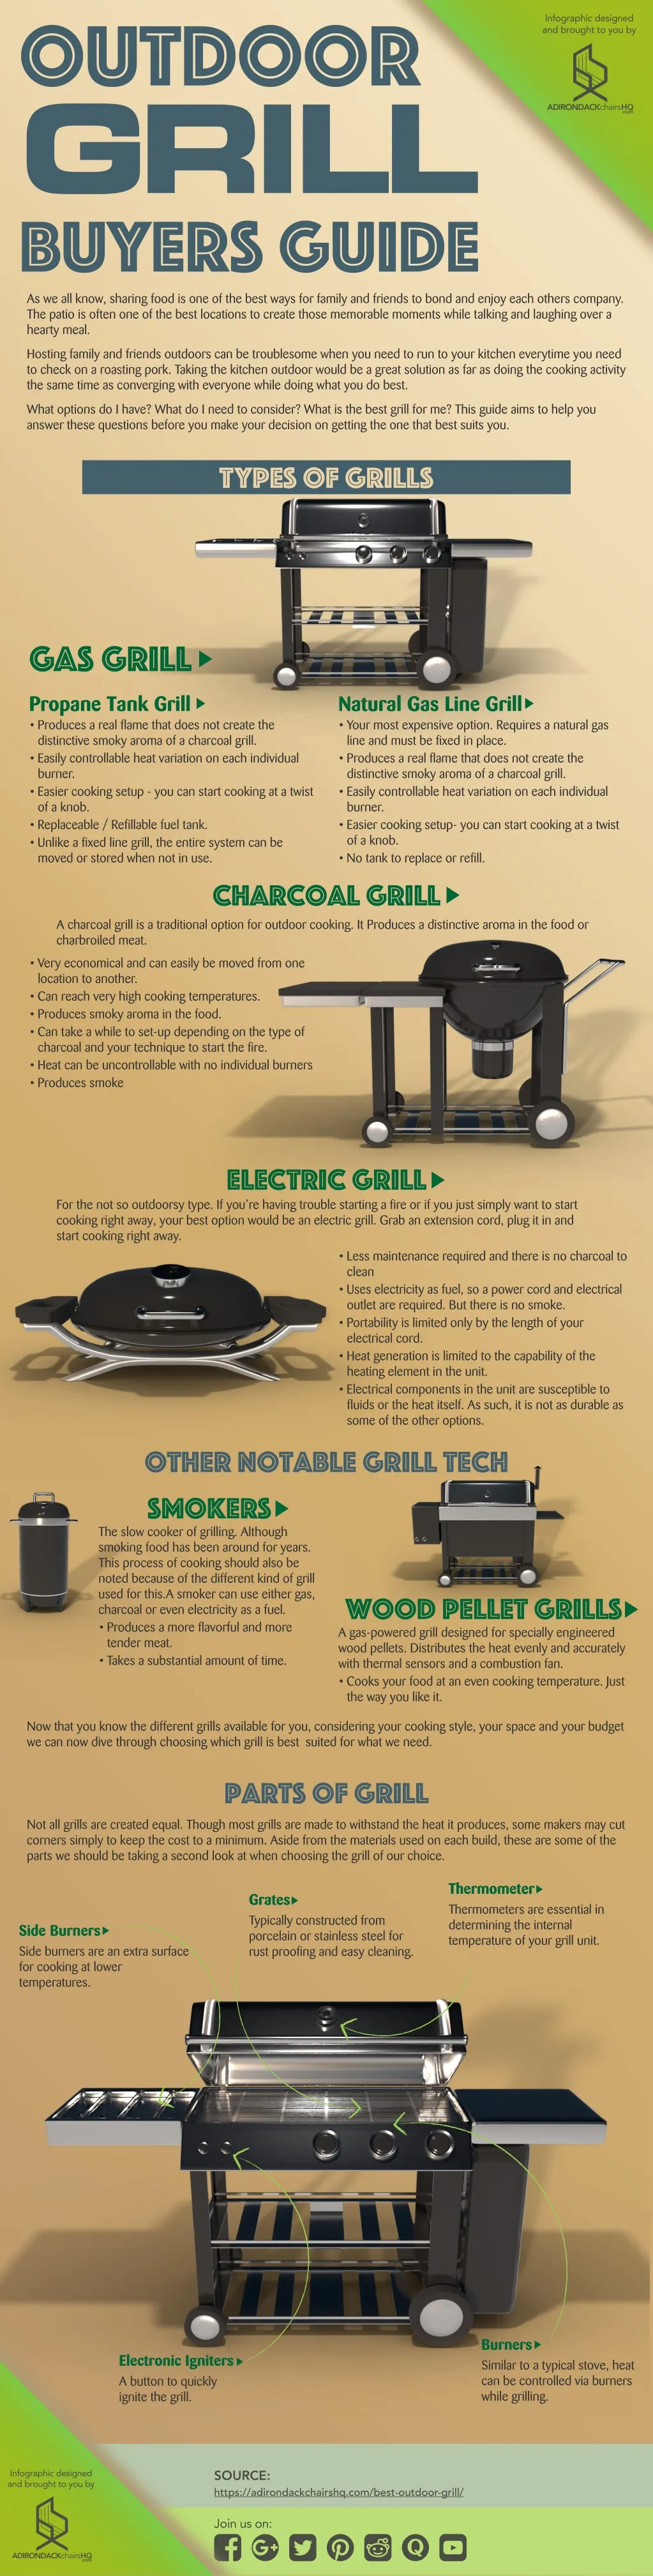 outdoor grill buyers guide as we all know sharing